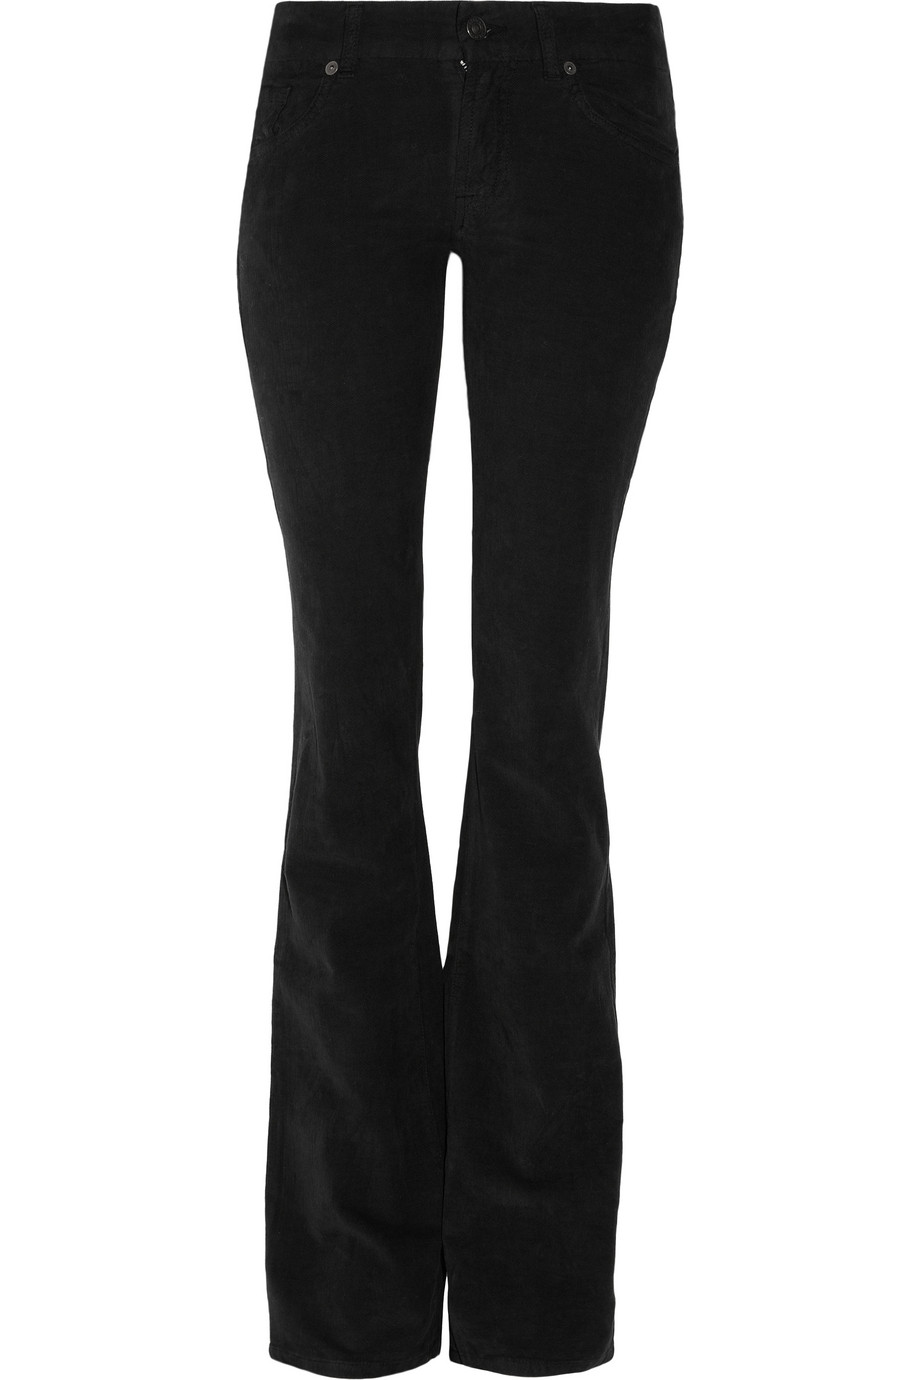 7 For All Mankind Kimmie Low-rise Bootcut Jeans in Black | Lyst